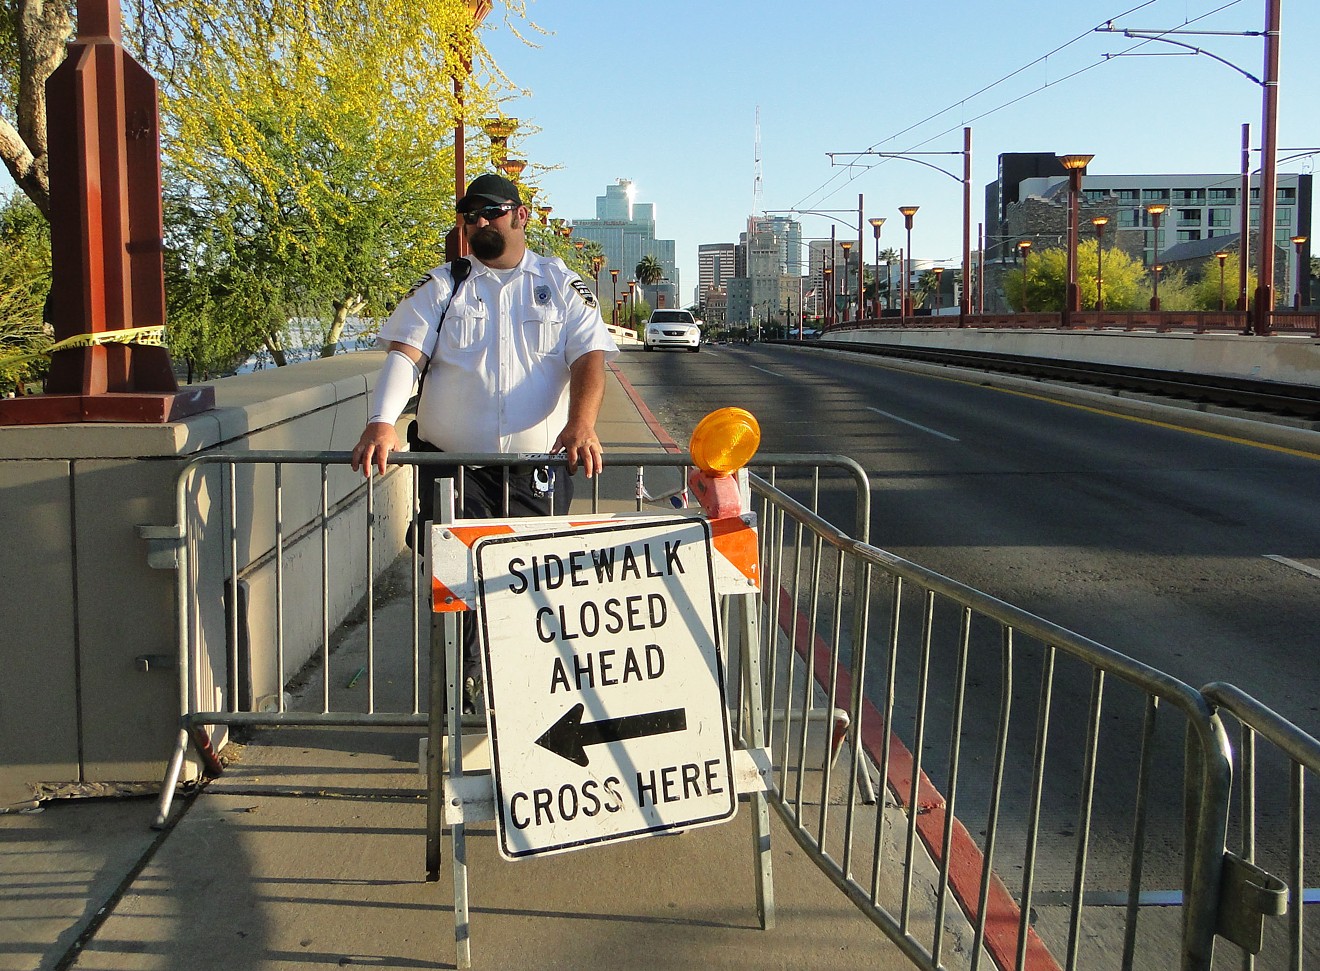 Security was heavy in and around Margaret Hance Park Sunday. Police stopped pedestrians crossing the Central Avenue bridge.